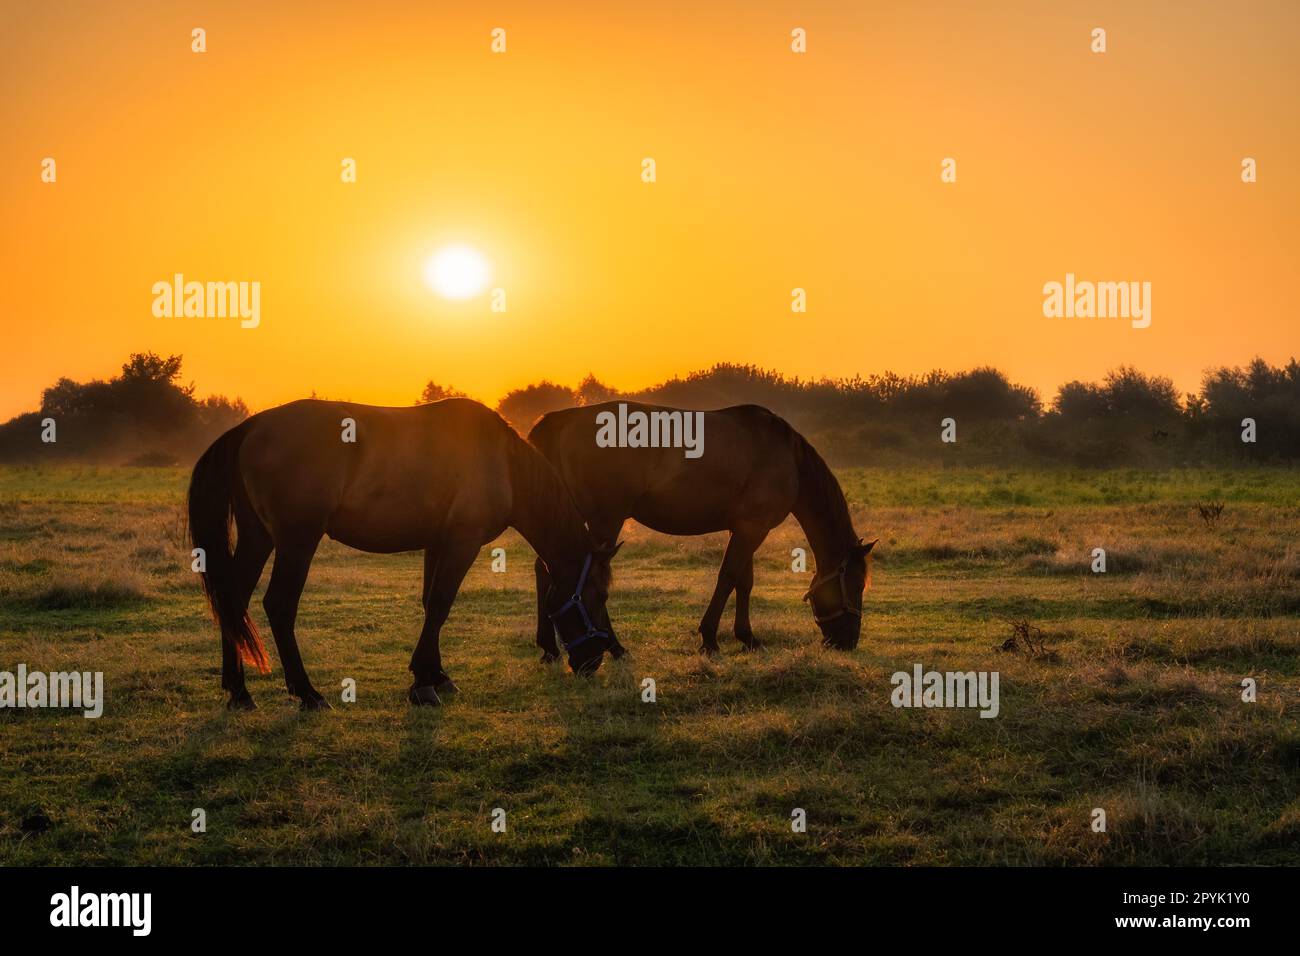 Two horses standing and grazing on a field at early morning, sunrise, Poland Stock Photo